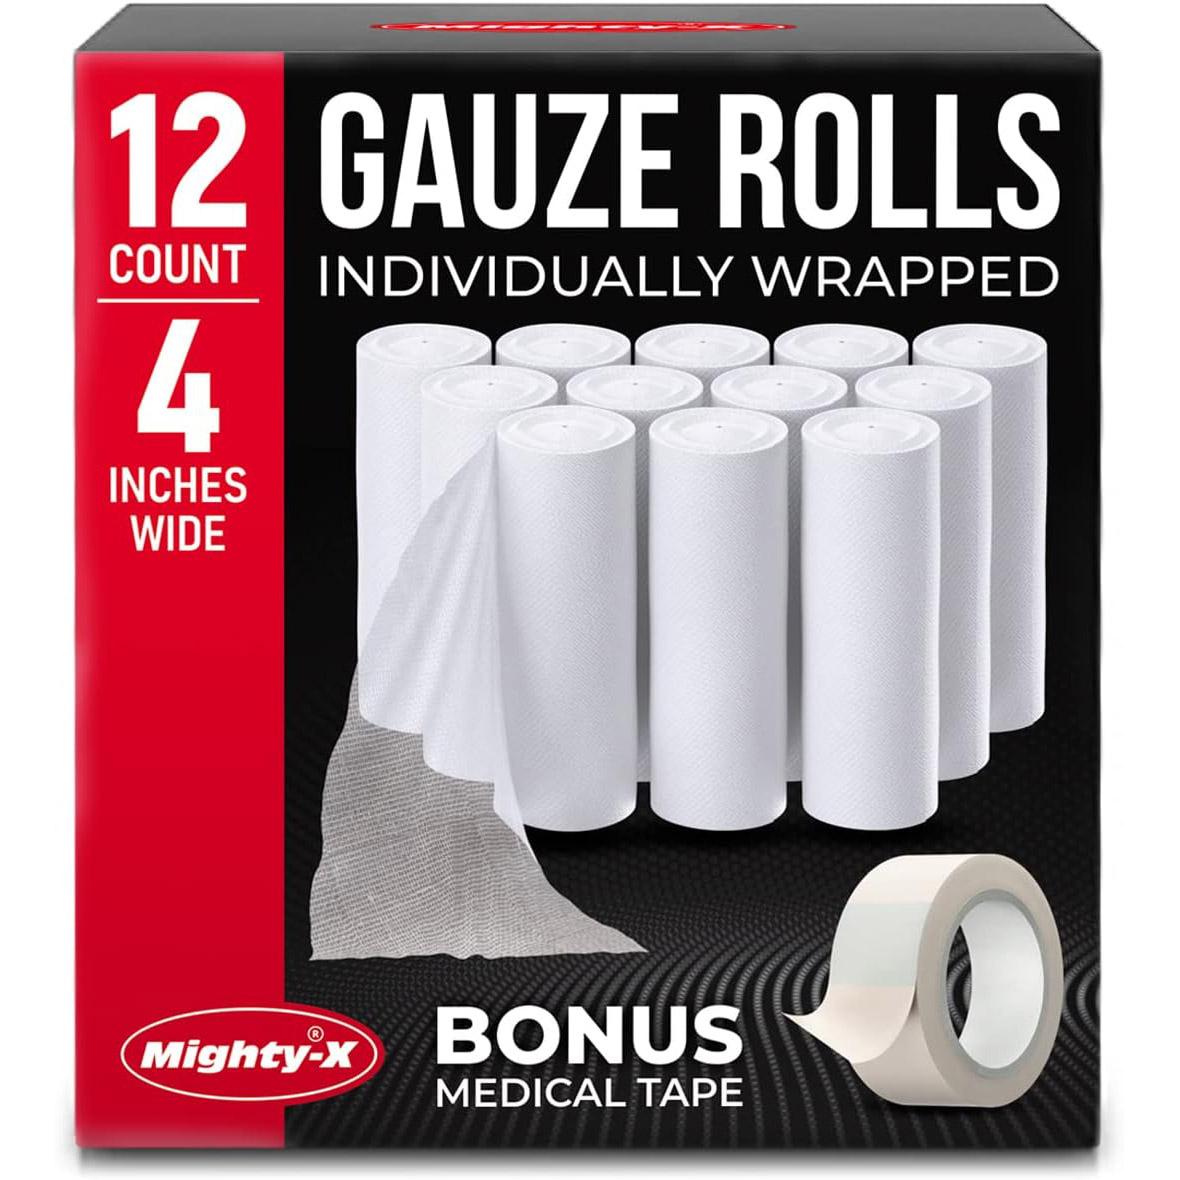 Mighty-X Premium Individually Wrapped Gauze Rolls 12 Pack for $3.14 Shipped